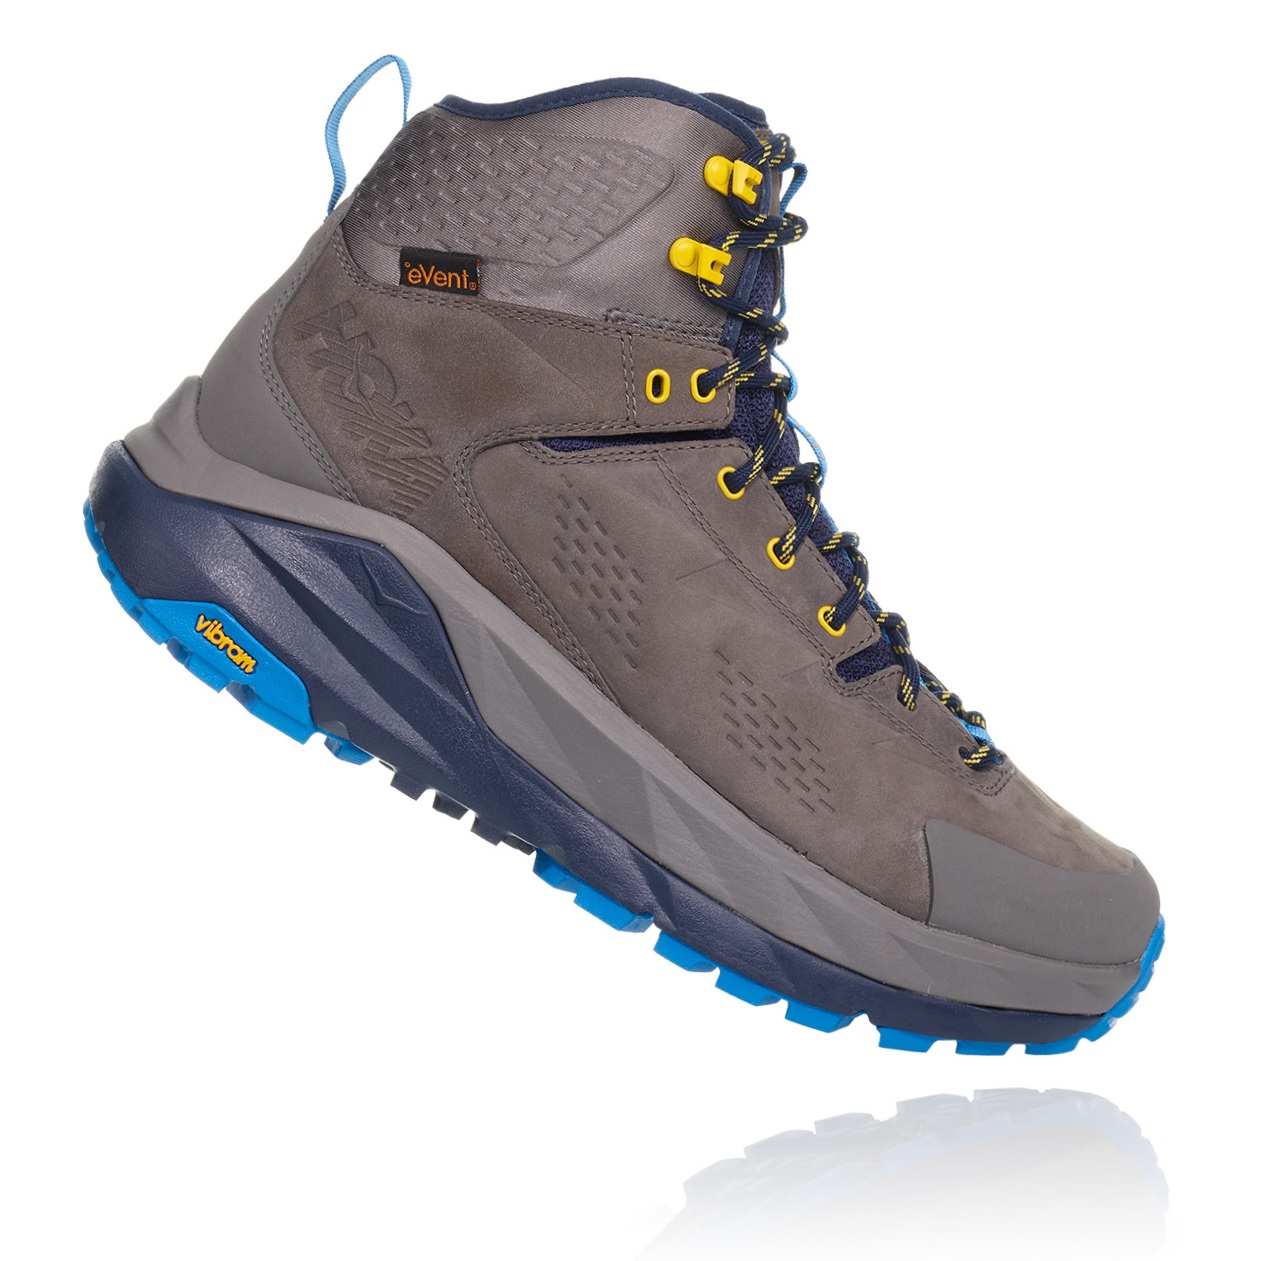 One Kaha walking boots reviewed (2019 